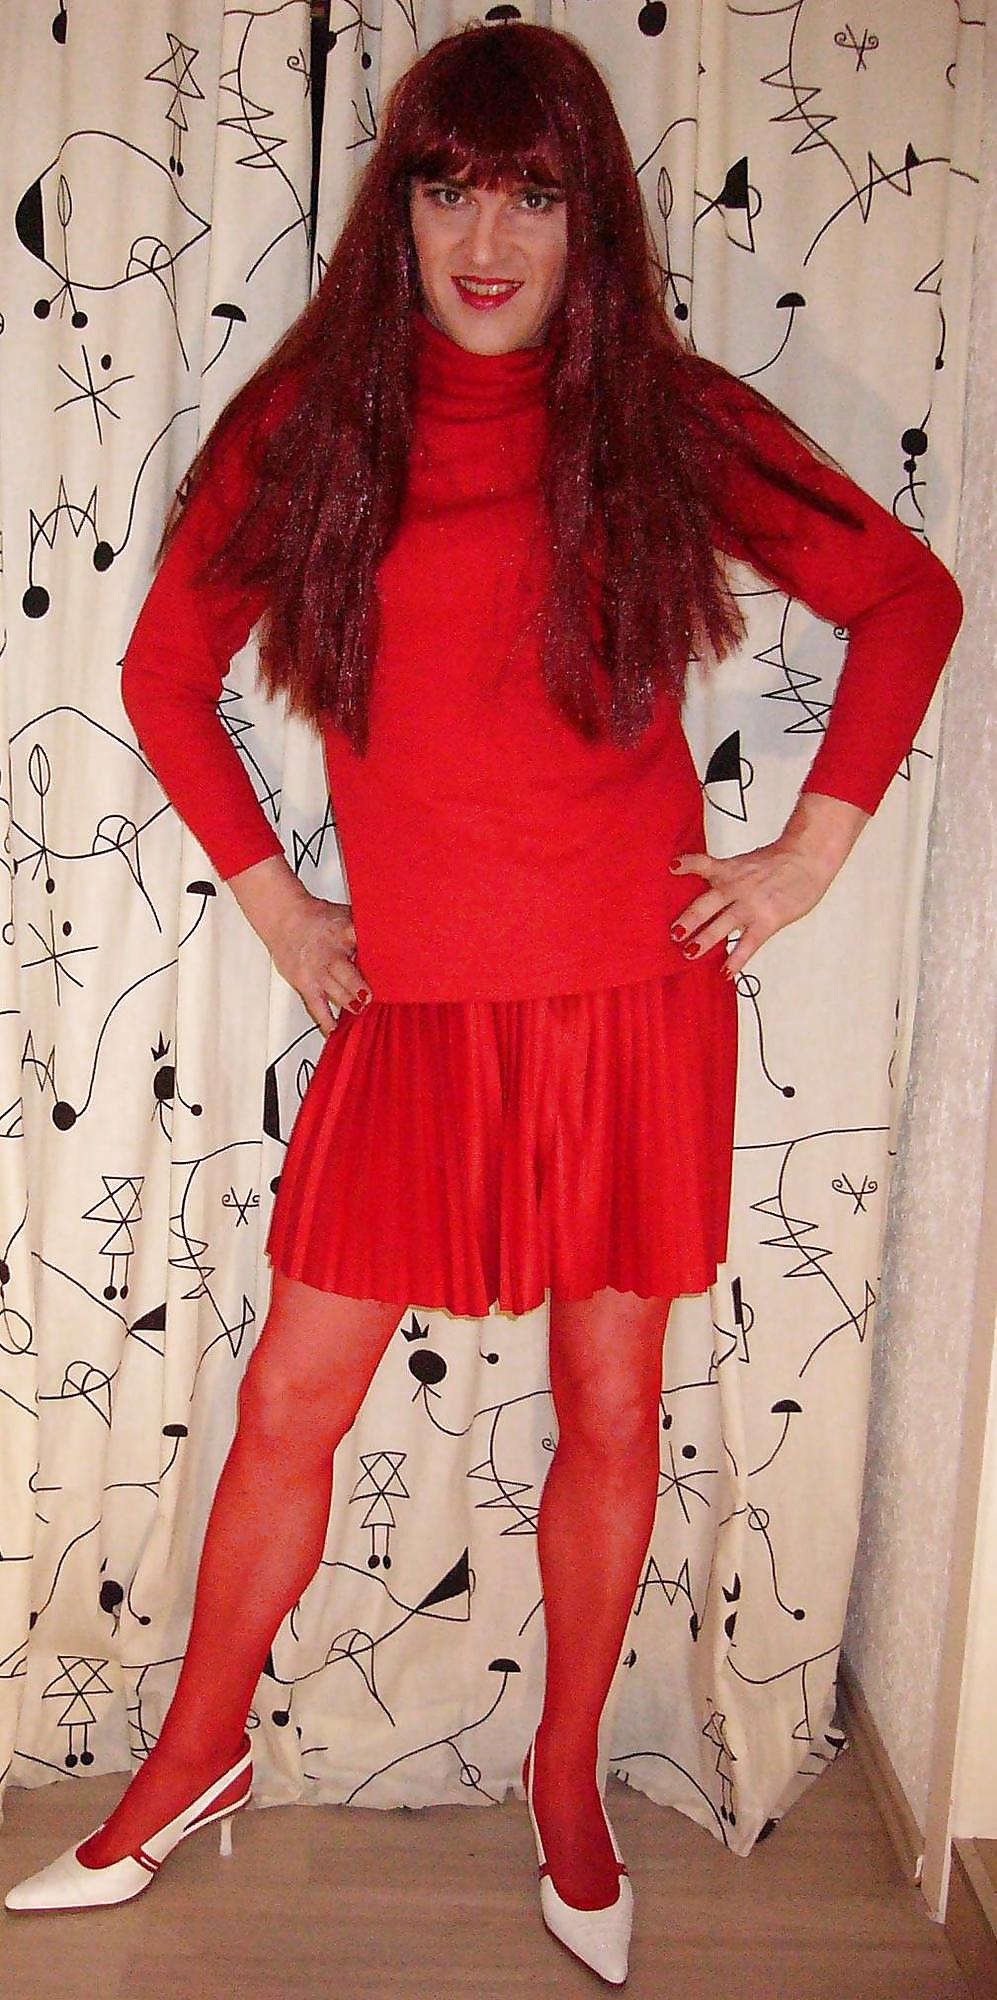 Lady in Red #2905648